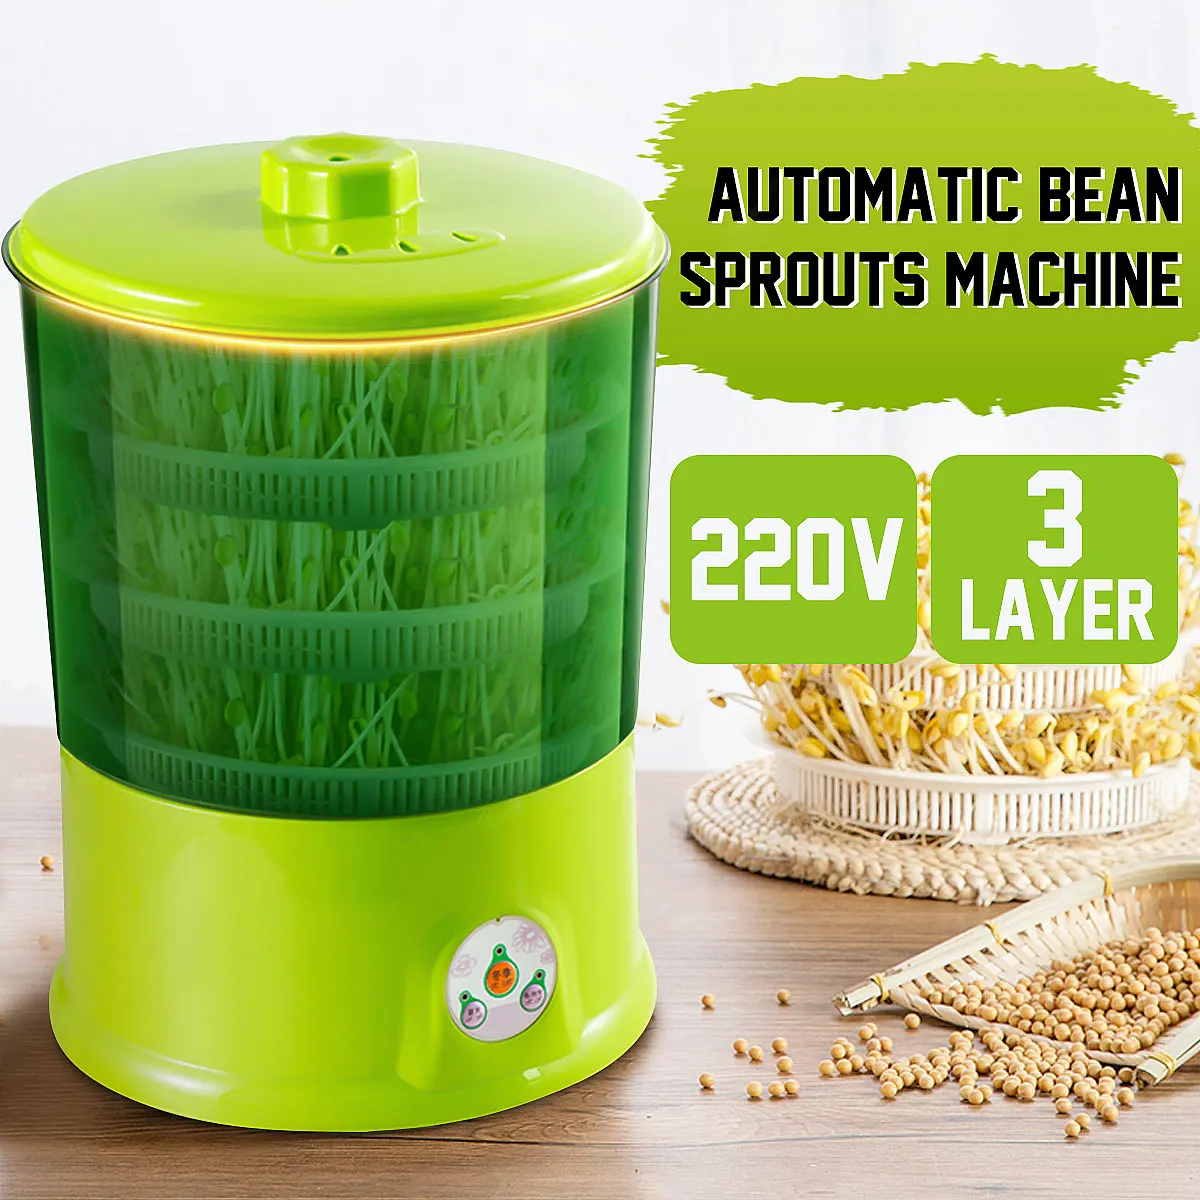 

220V Automatic Bean Sprouts Machine 2-3 Layers Large Capacity Household Electric Bean Sprout Germination Cereal Growing Machine